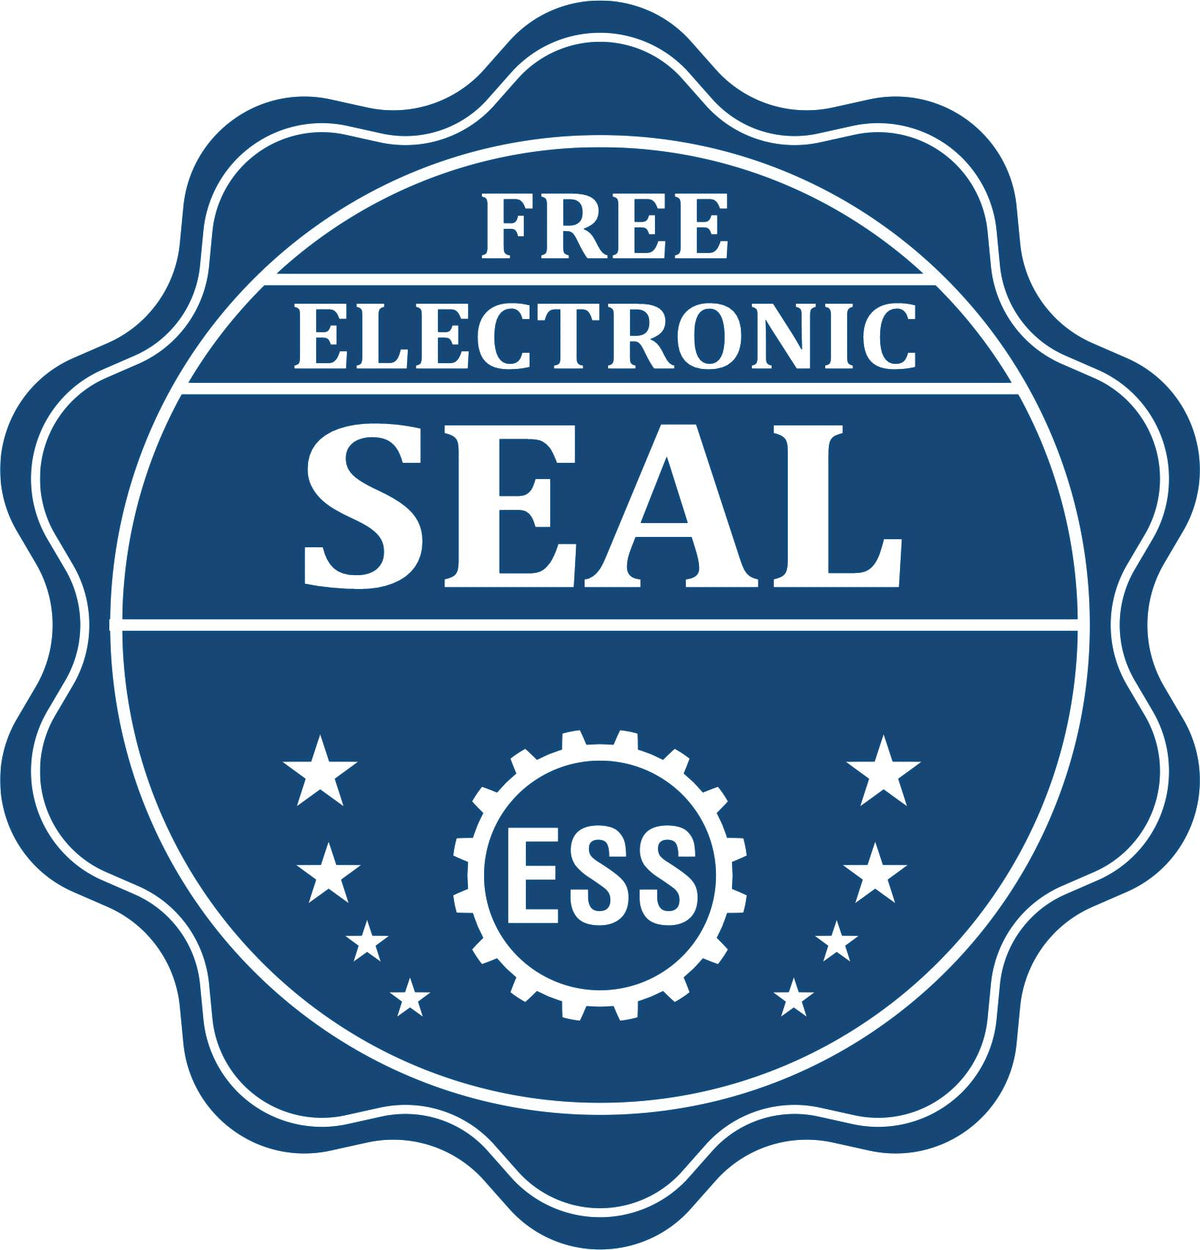 A badge showing a free electronic seal for the Hybrid Nebraska Geologist Seal with stars and the ESS gear on the emblem.